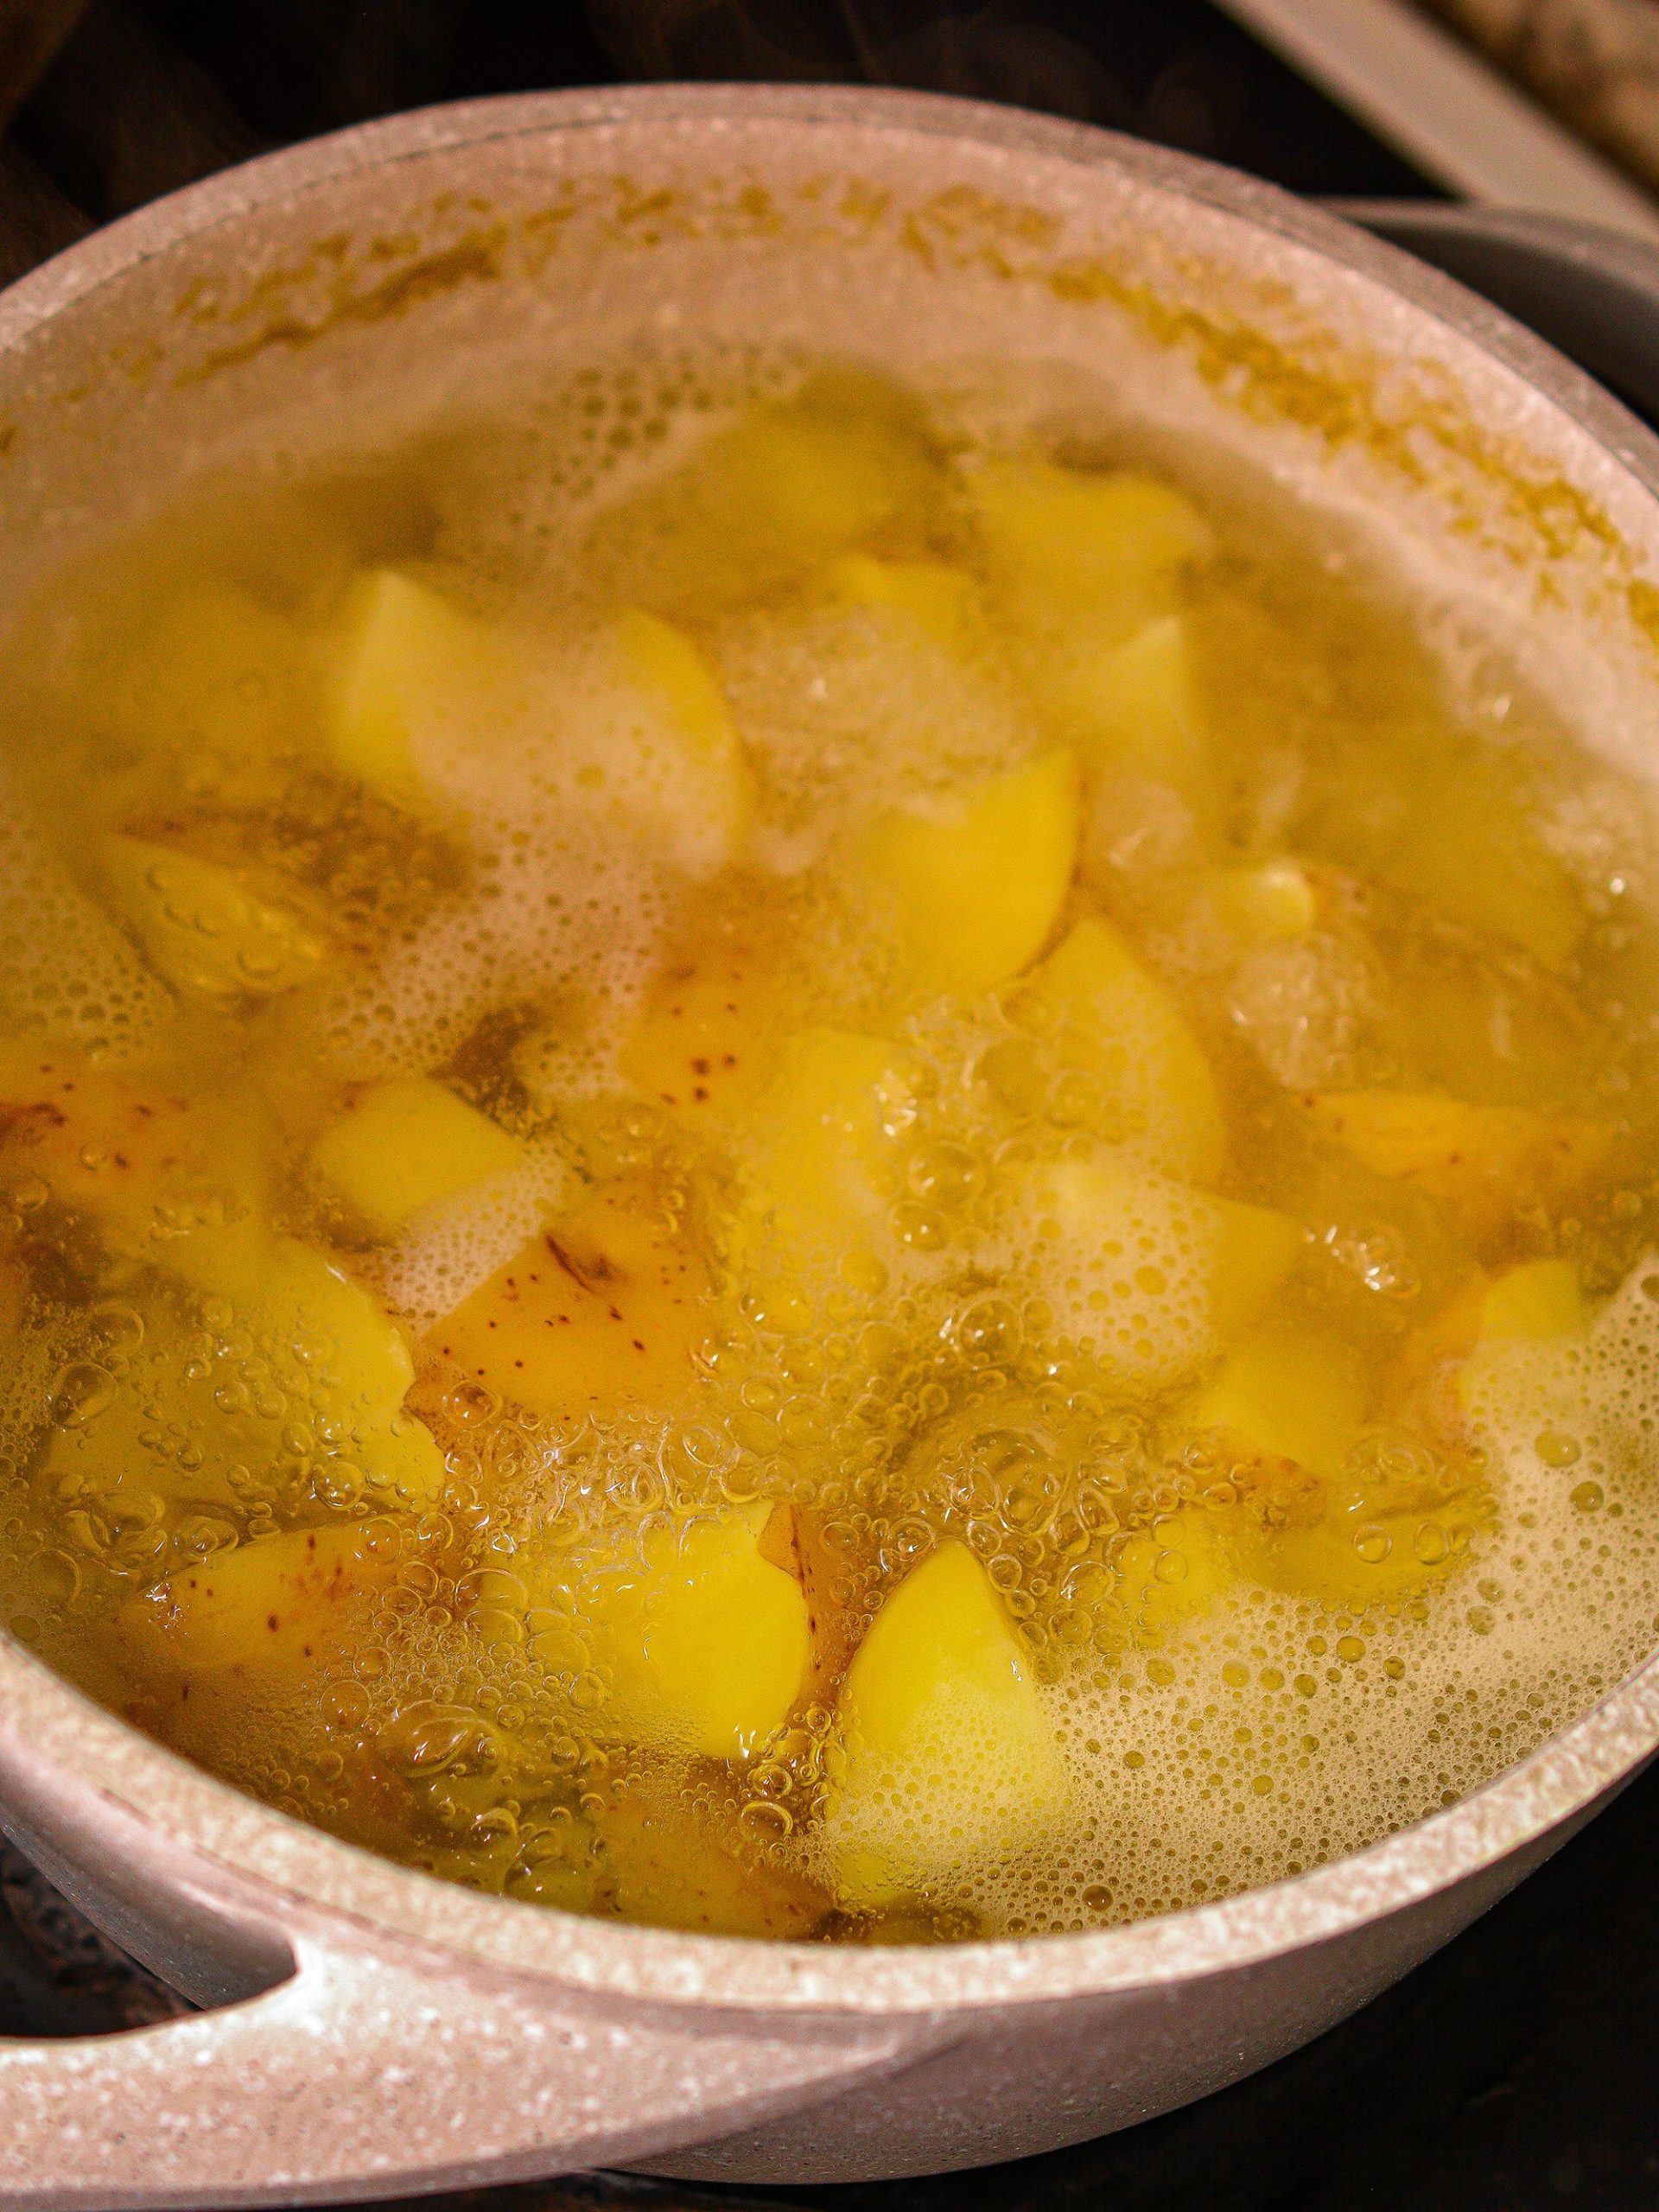 Start by boiling the potatoes.